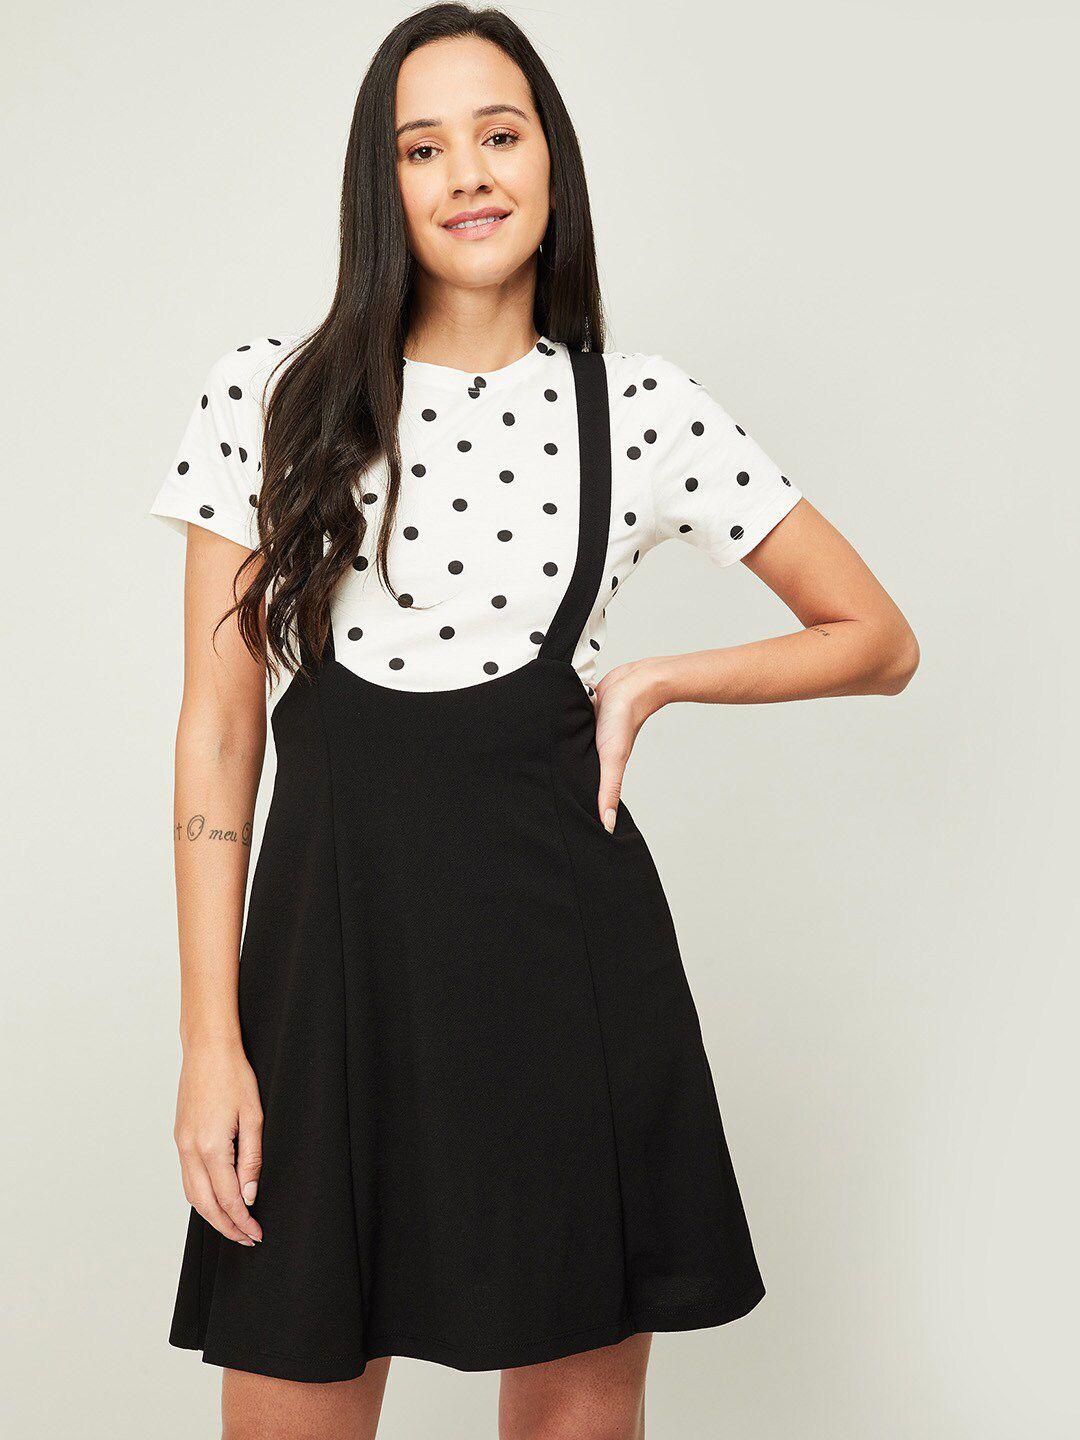 ginger by lifestyle black & white polka dots pinafore dress